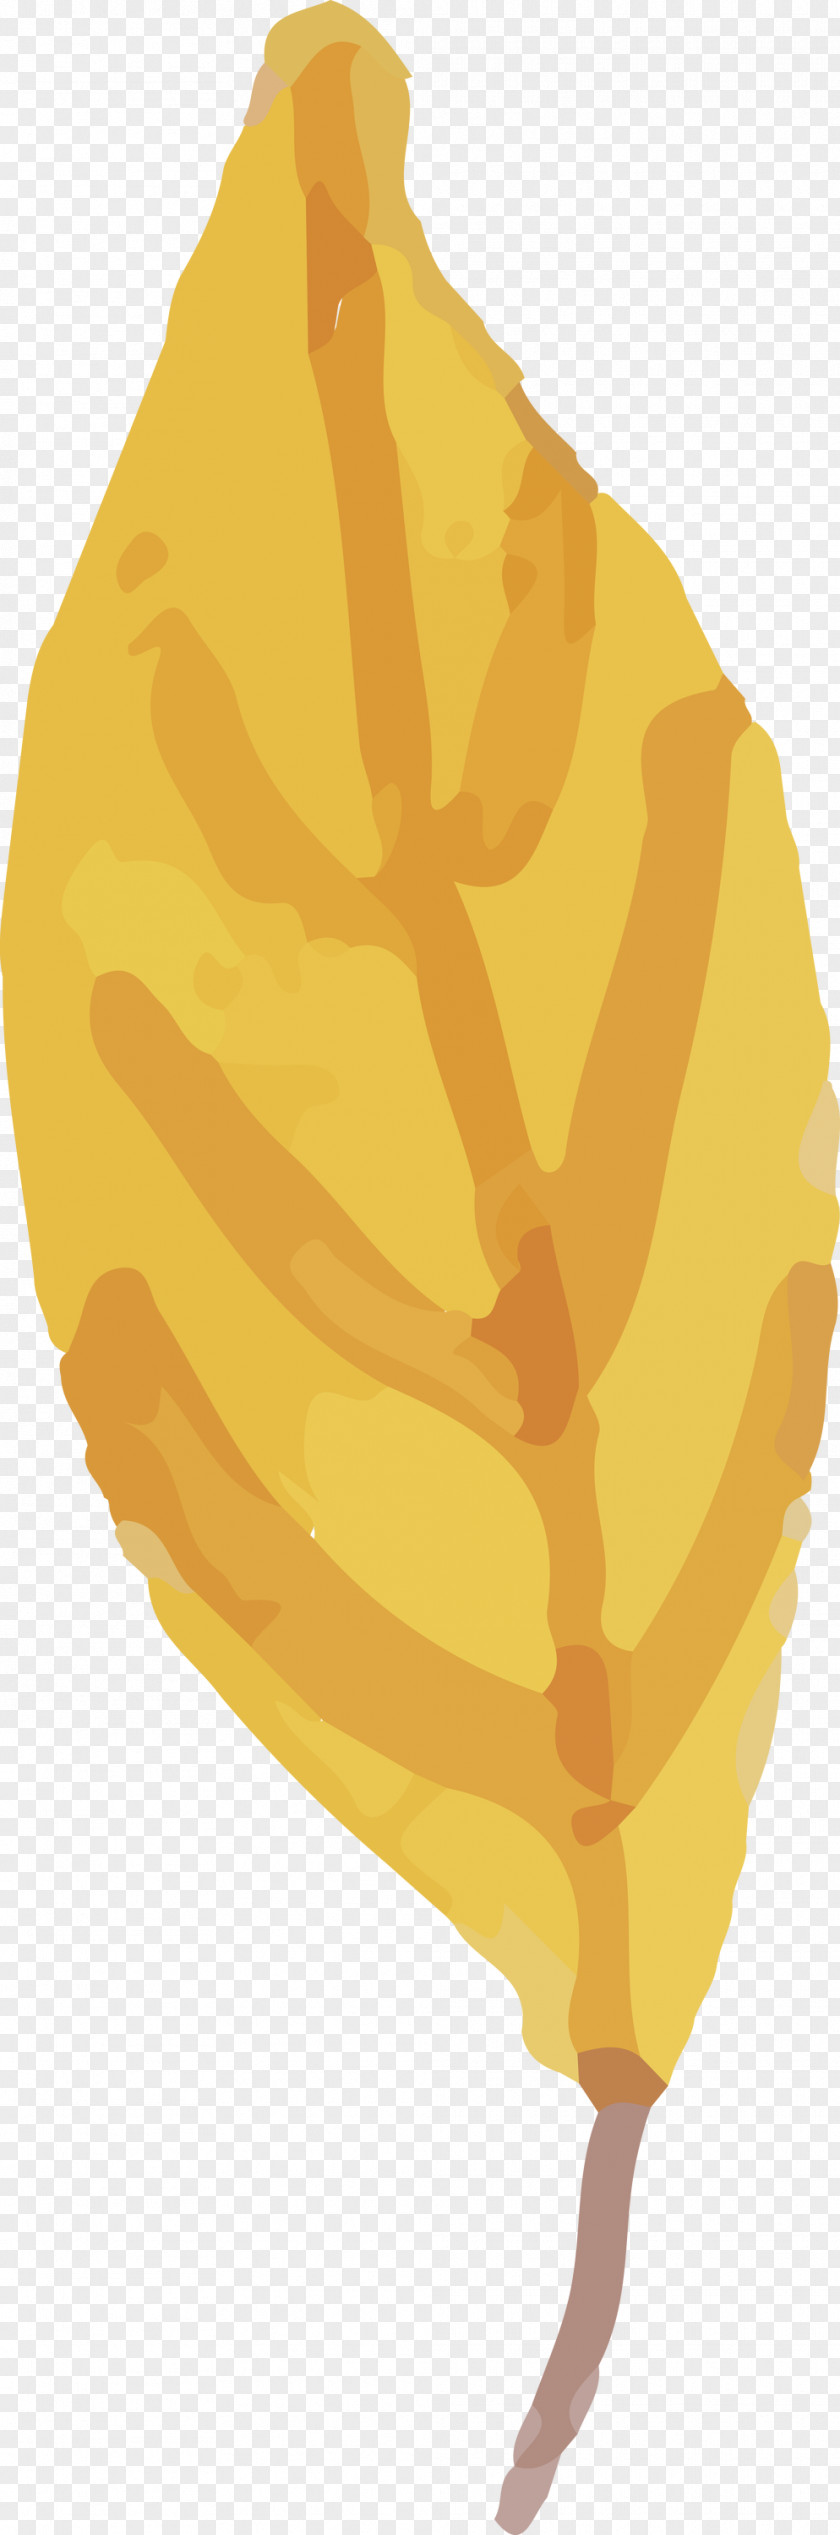 Leaf Yellow Commodity Fruit Biology PNG